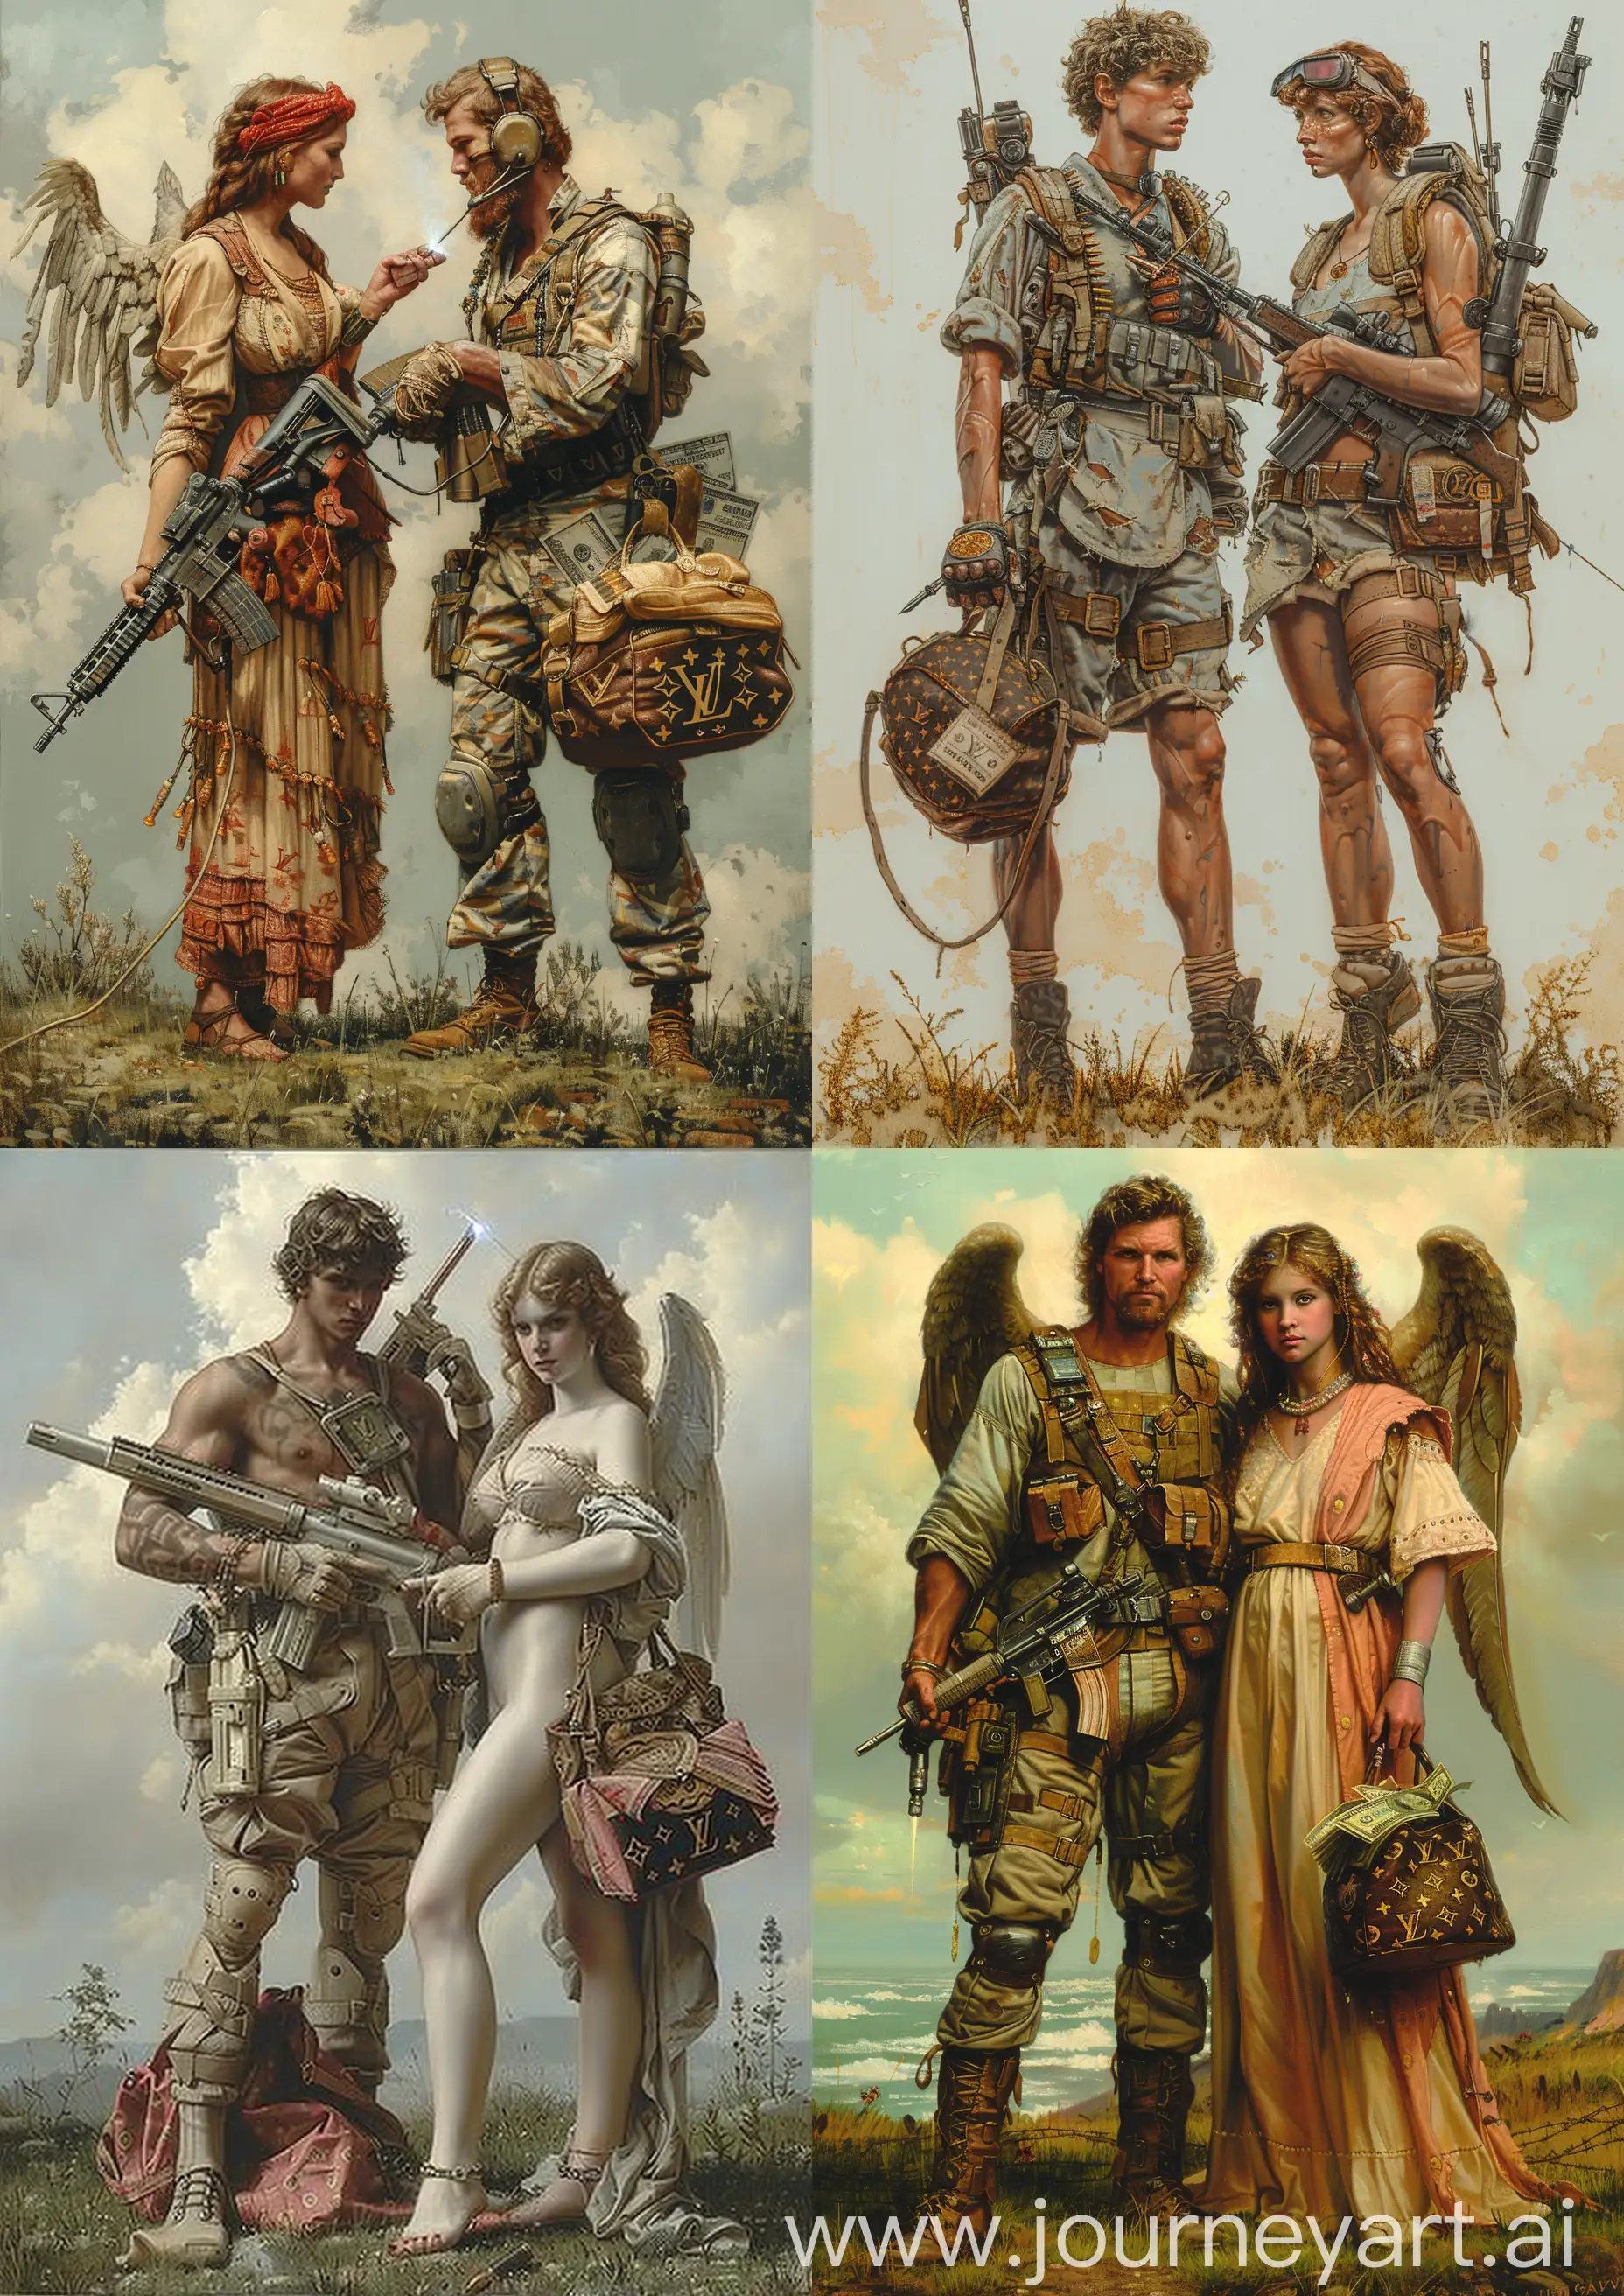 Futuristic-Angel-Warriors-with-M16-Rifle-and-Louis-Vuitton-Bag-on-Grass